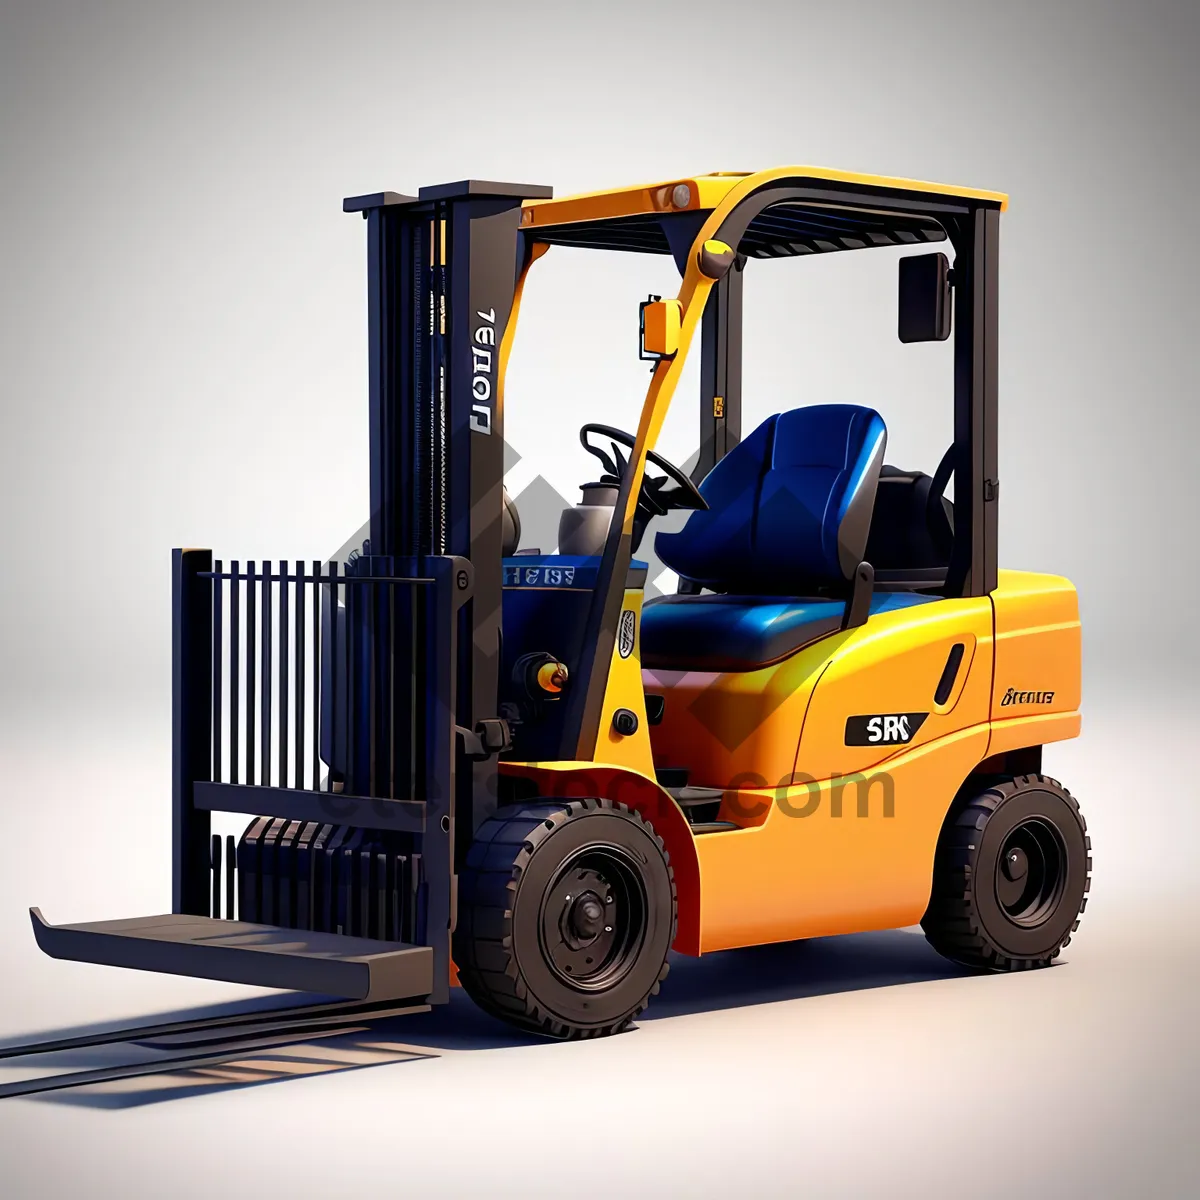 Picture of Yellow Heavy Duty Forklift Loader in Construction Site